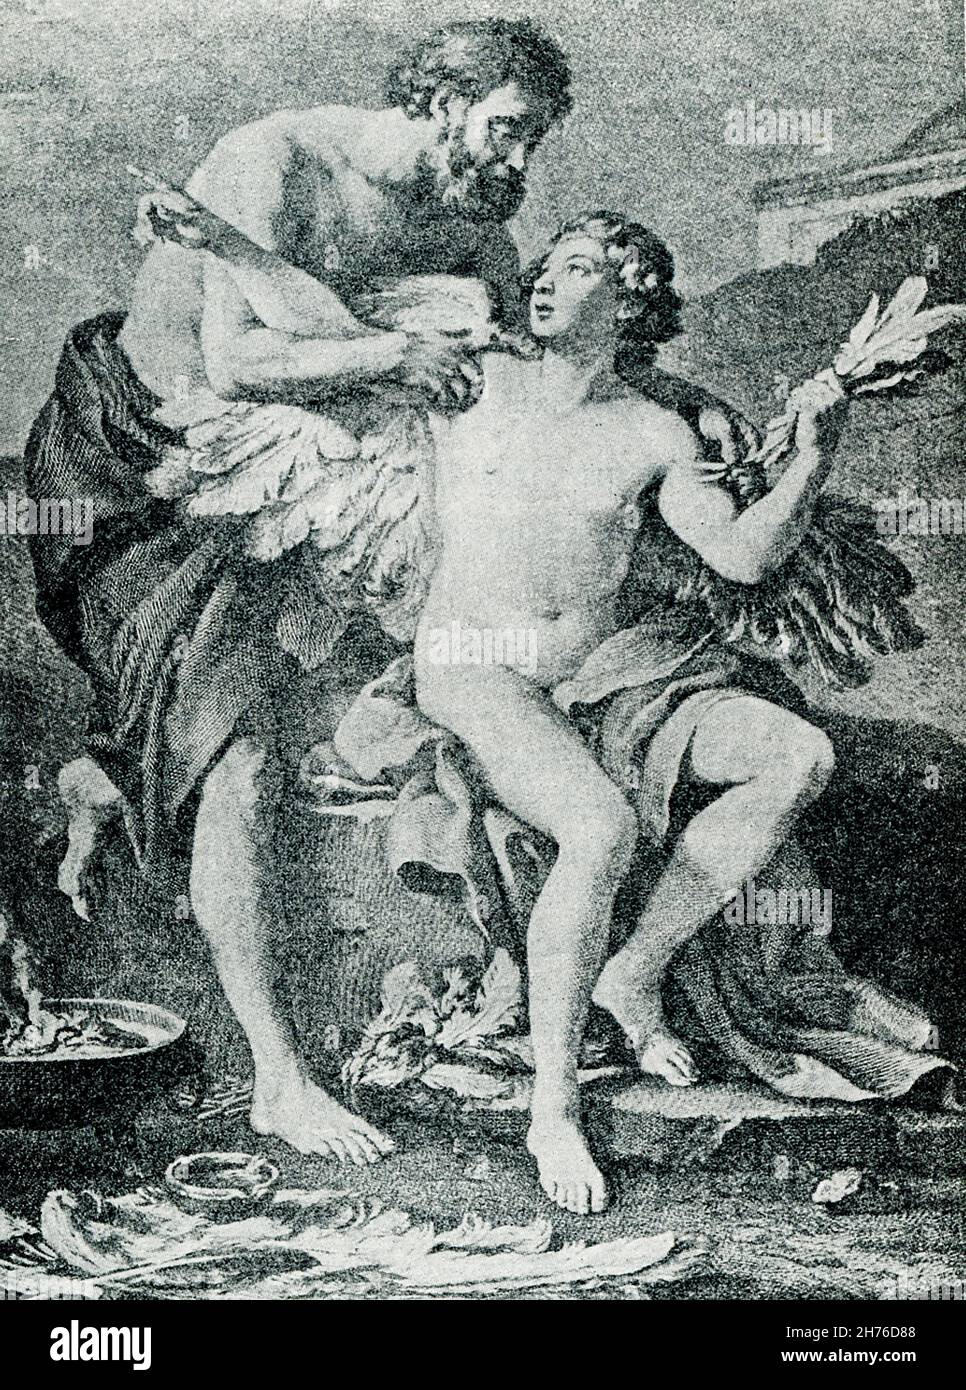 This illustration of Daedalus and Icarus was done by J M Virn. In Greek mythology, Daedalus (left) was the builder of the labyrinth at Knossos in Crete (designed to keep the Minotaur within). To escape his confinement on the island by the king, he designed wings of wax and feathers for himself and his son, Icarus (right). But, Icarus flew too close to the sun. The wax melted, and he fell into the sea (name after the Icarian sea). Daedalus made it to Sicily, where he was said to have died later. Stock Photo